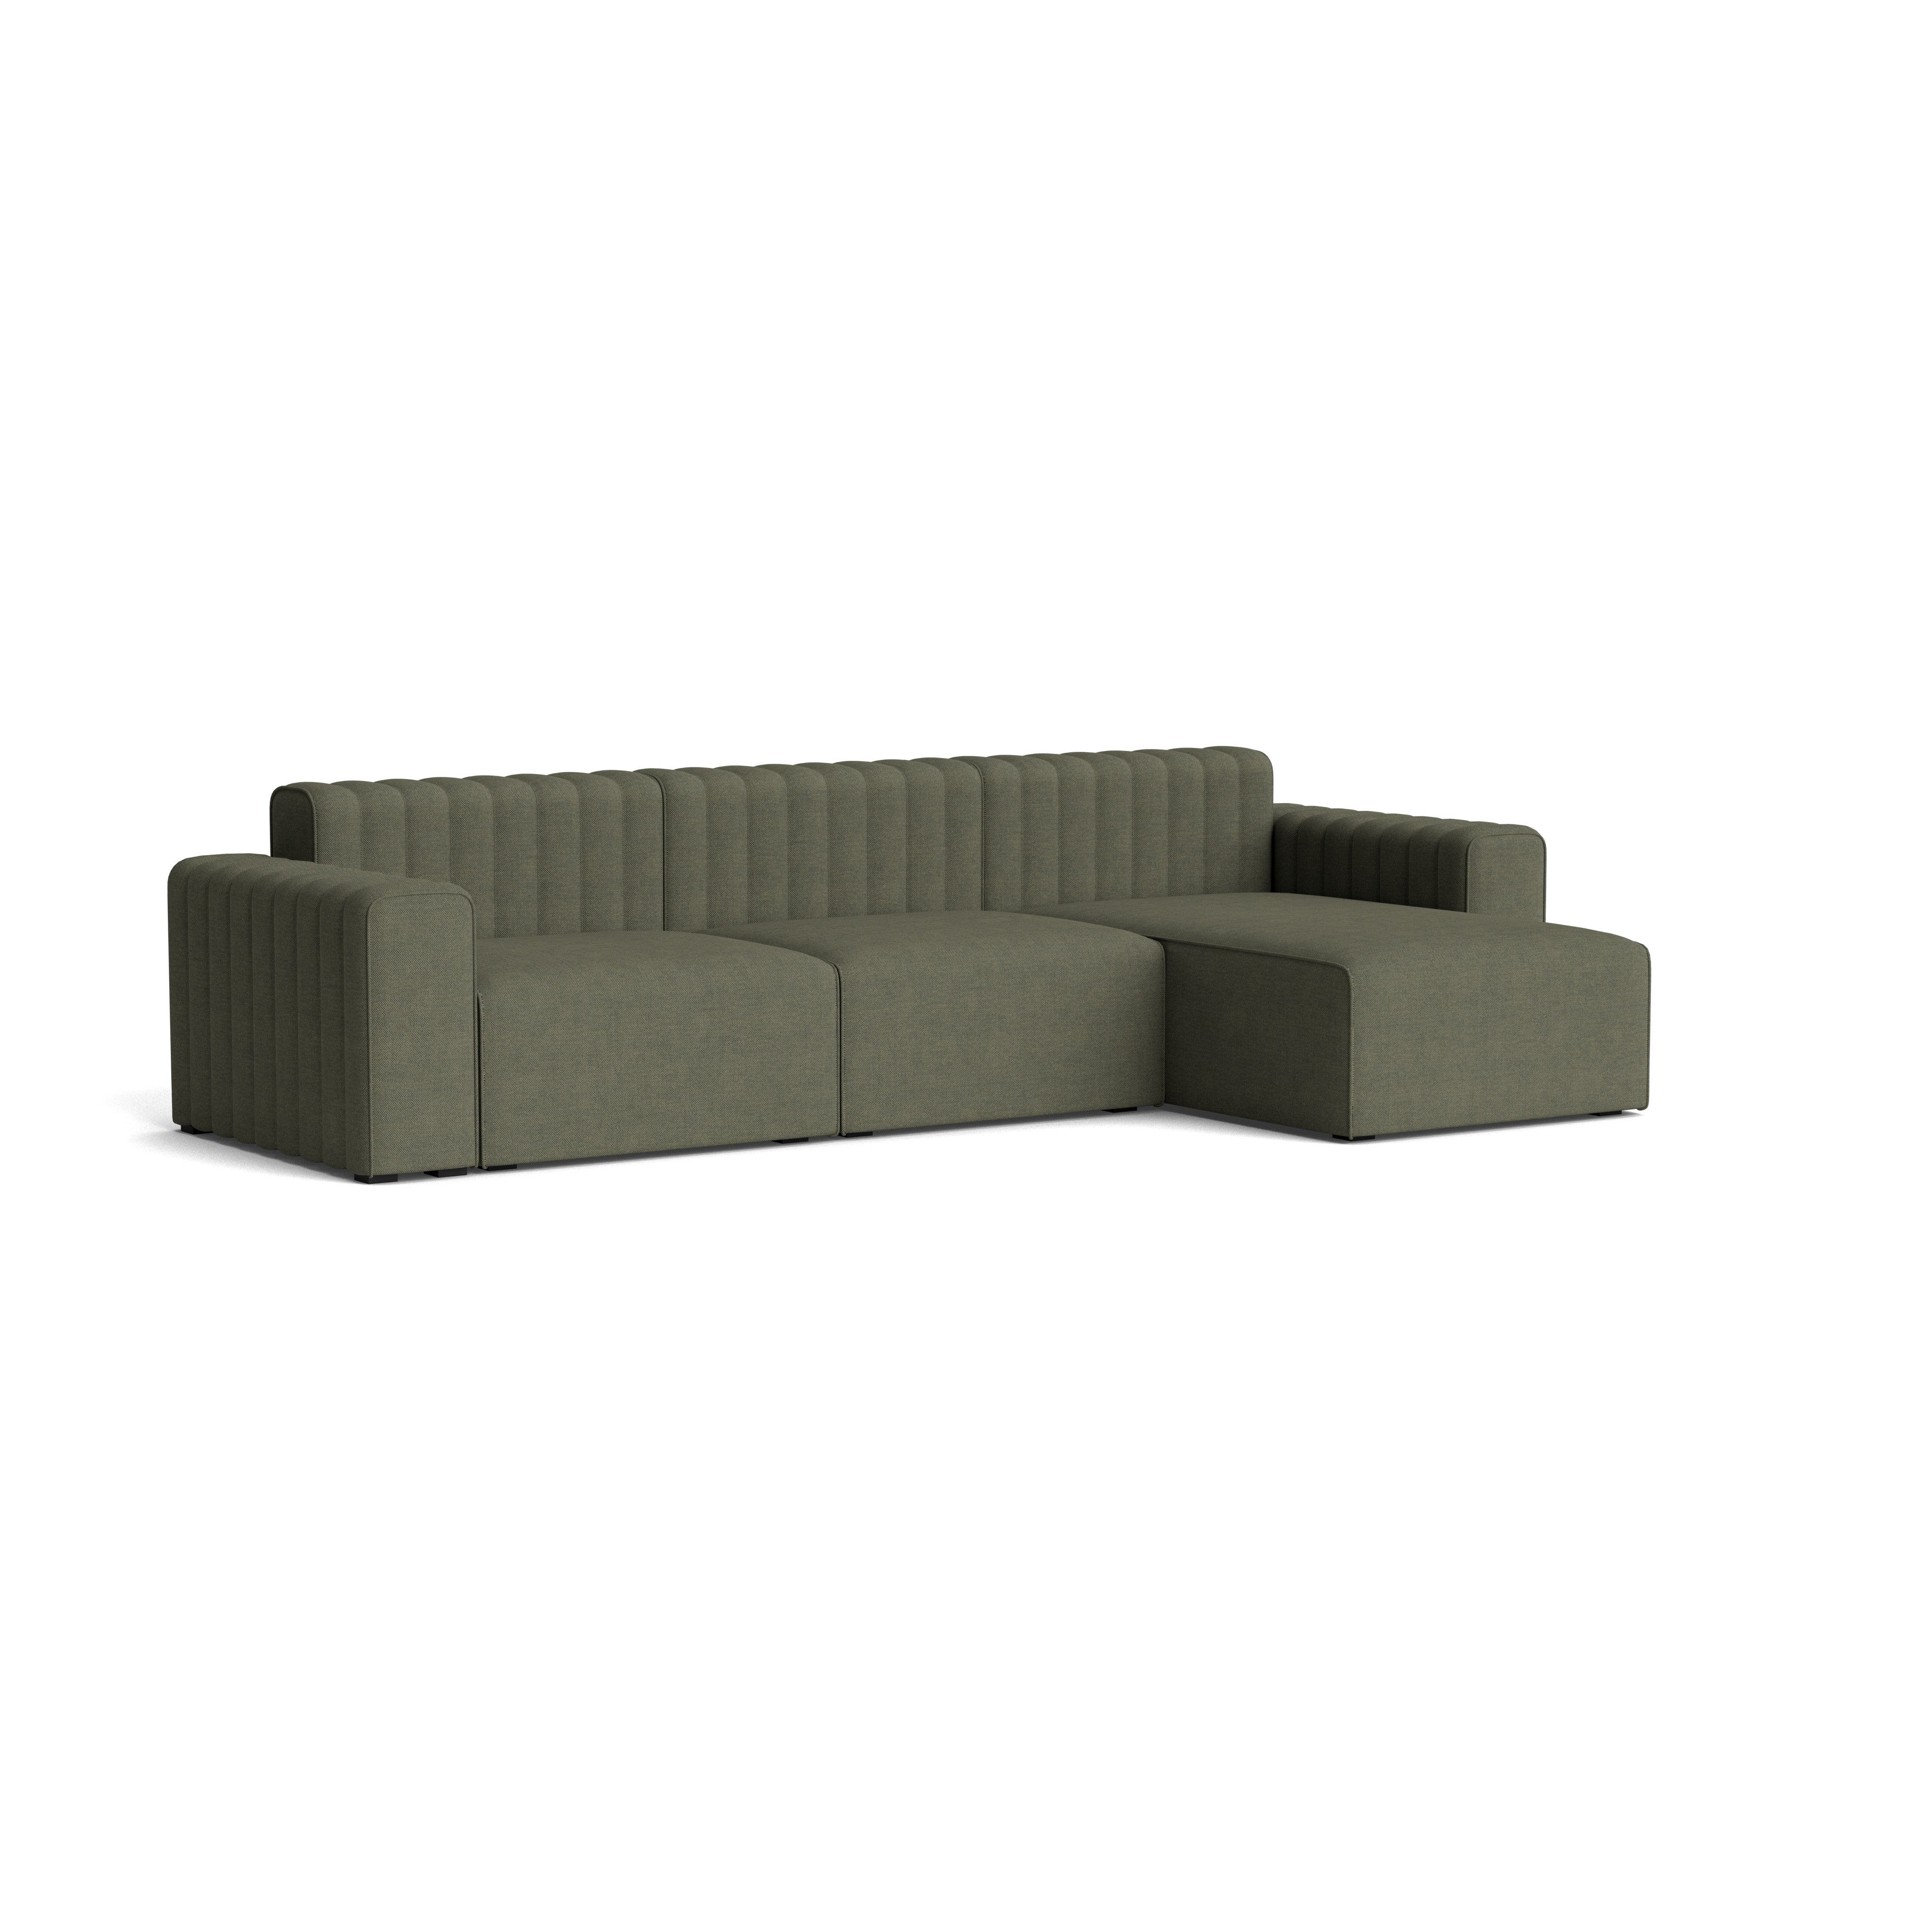 NORR11 RIFF Sofa - 3 Seater w/ Chaise Longue Left